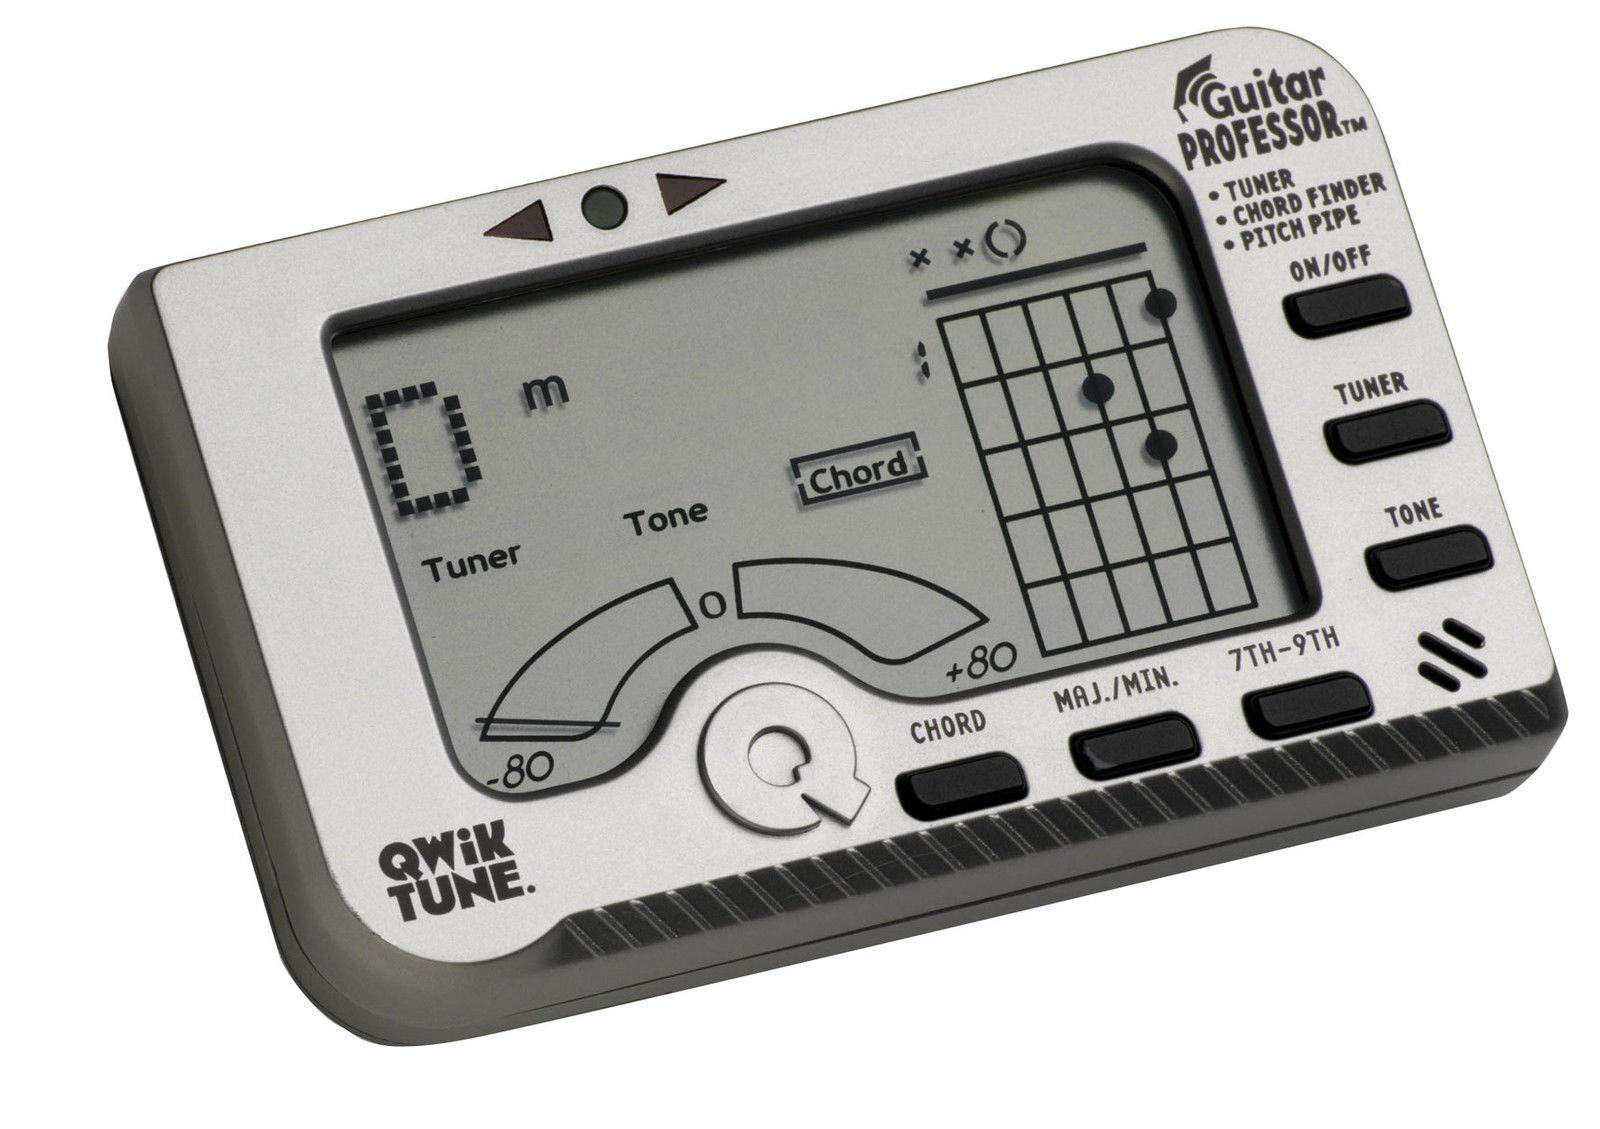 Qwik Tune Guitar Professor Electronic Tuner And Chord Finder